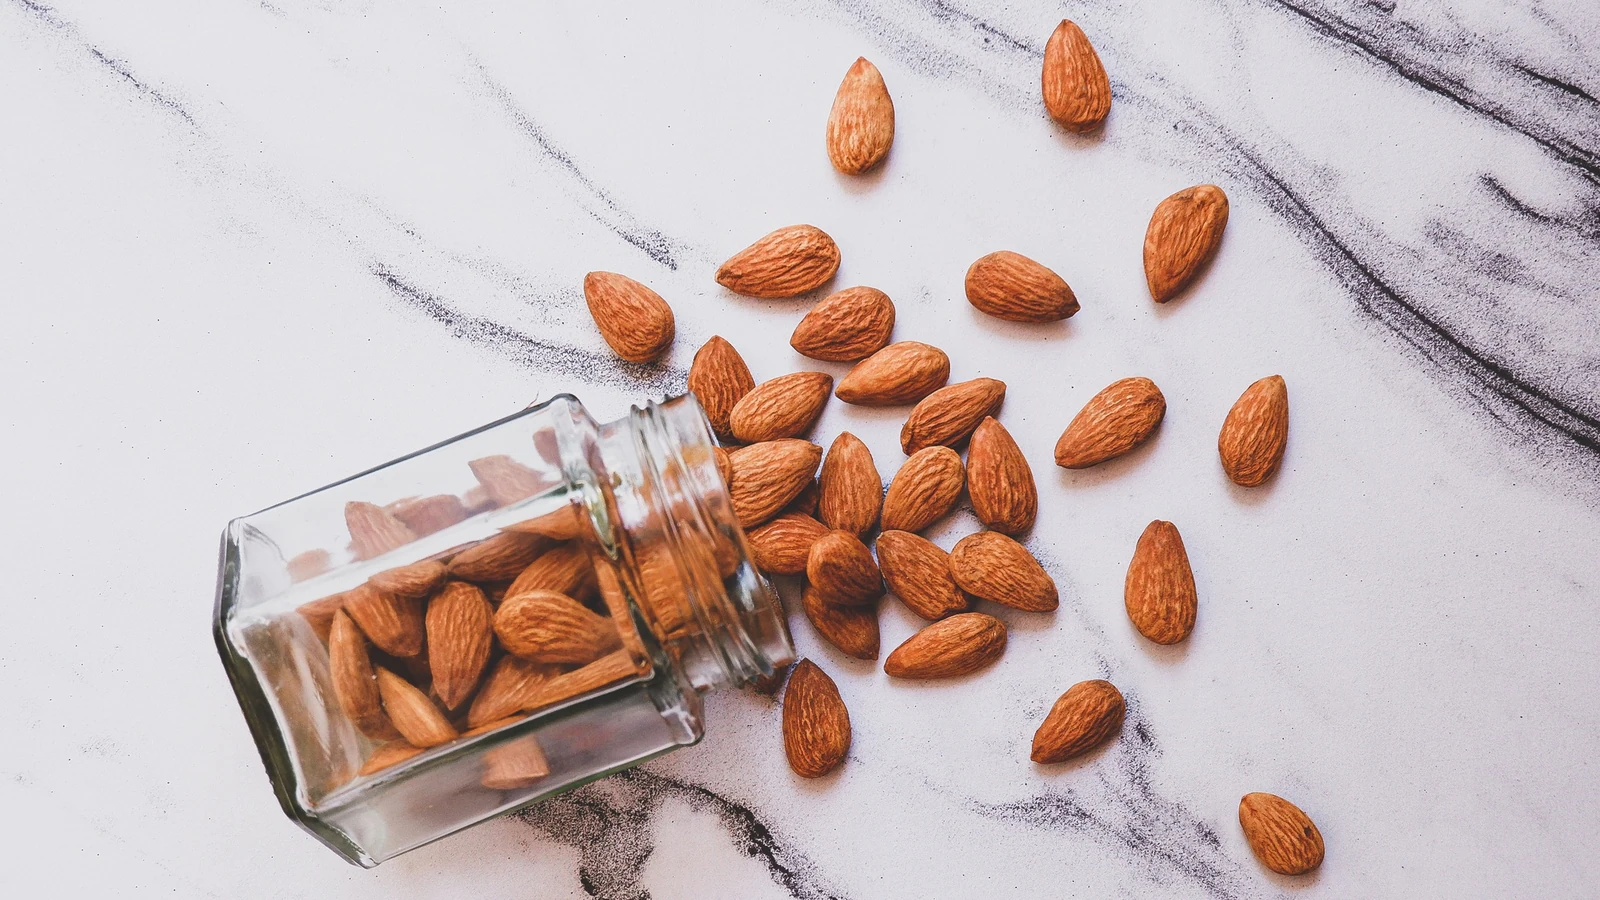 Snacking on Almonds Boosts Gut Health